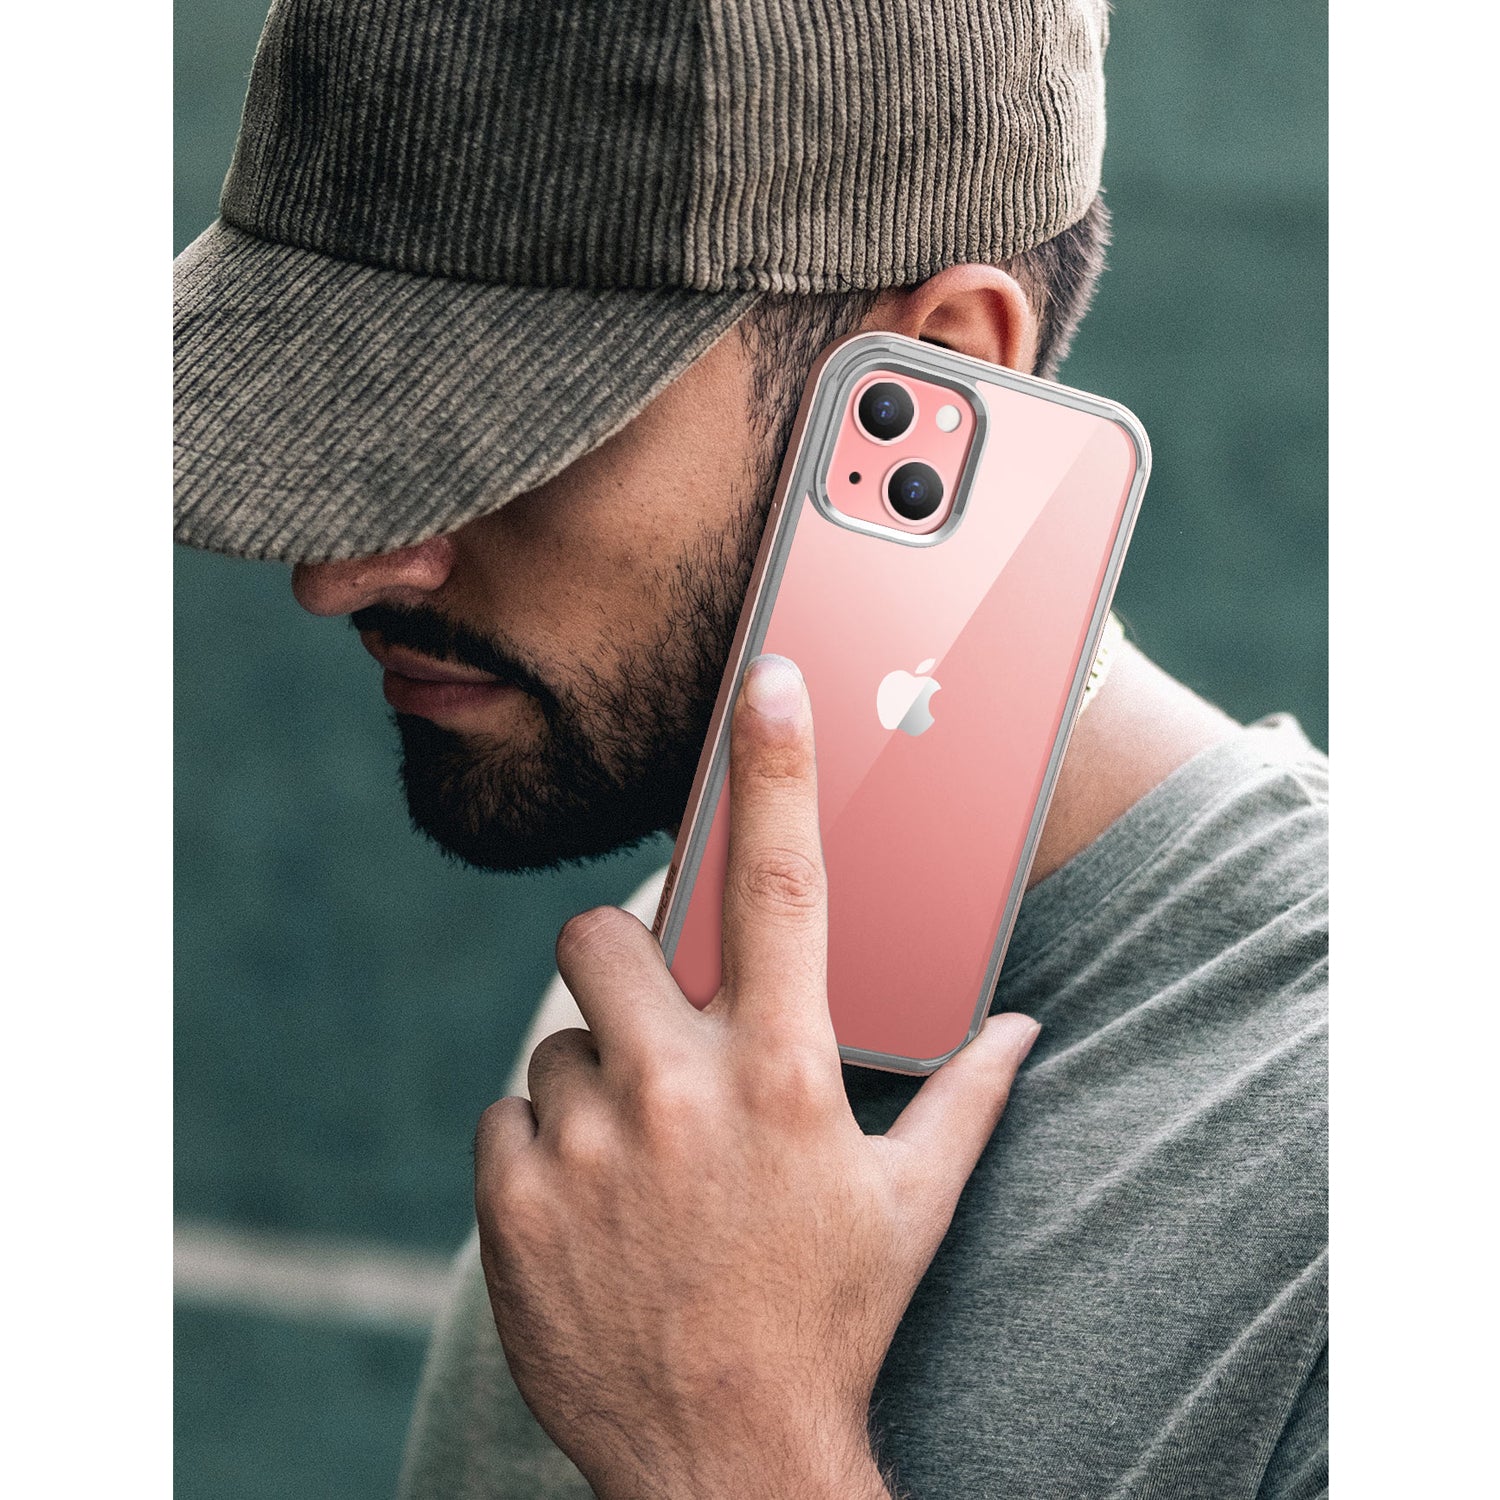 Supcase Unicorn Beetle Edge Series Slim Frame Case with TPU Inner Bumper for iPhone 13 6.1"(2021) Default Supcase 